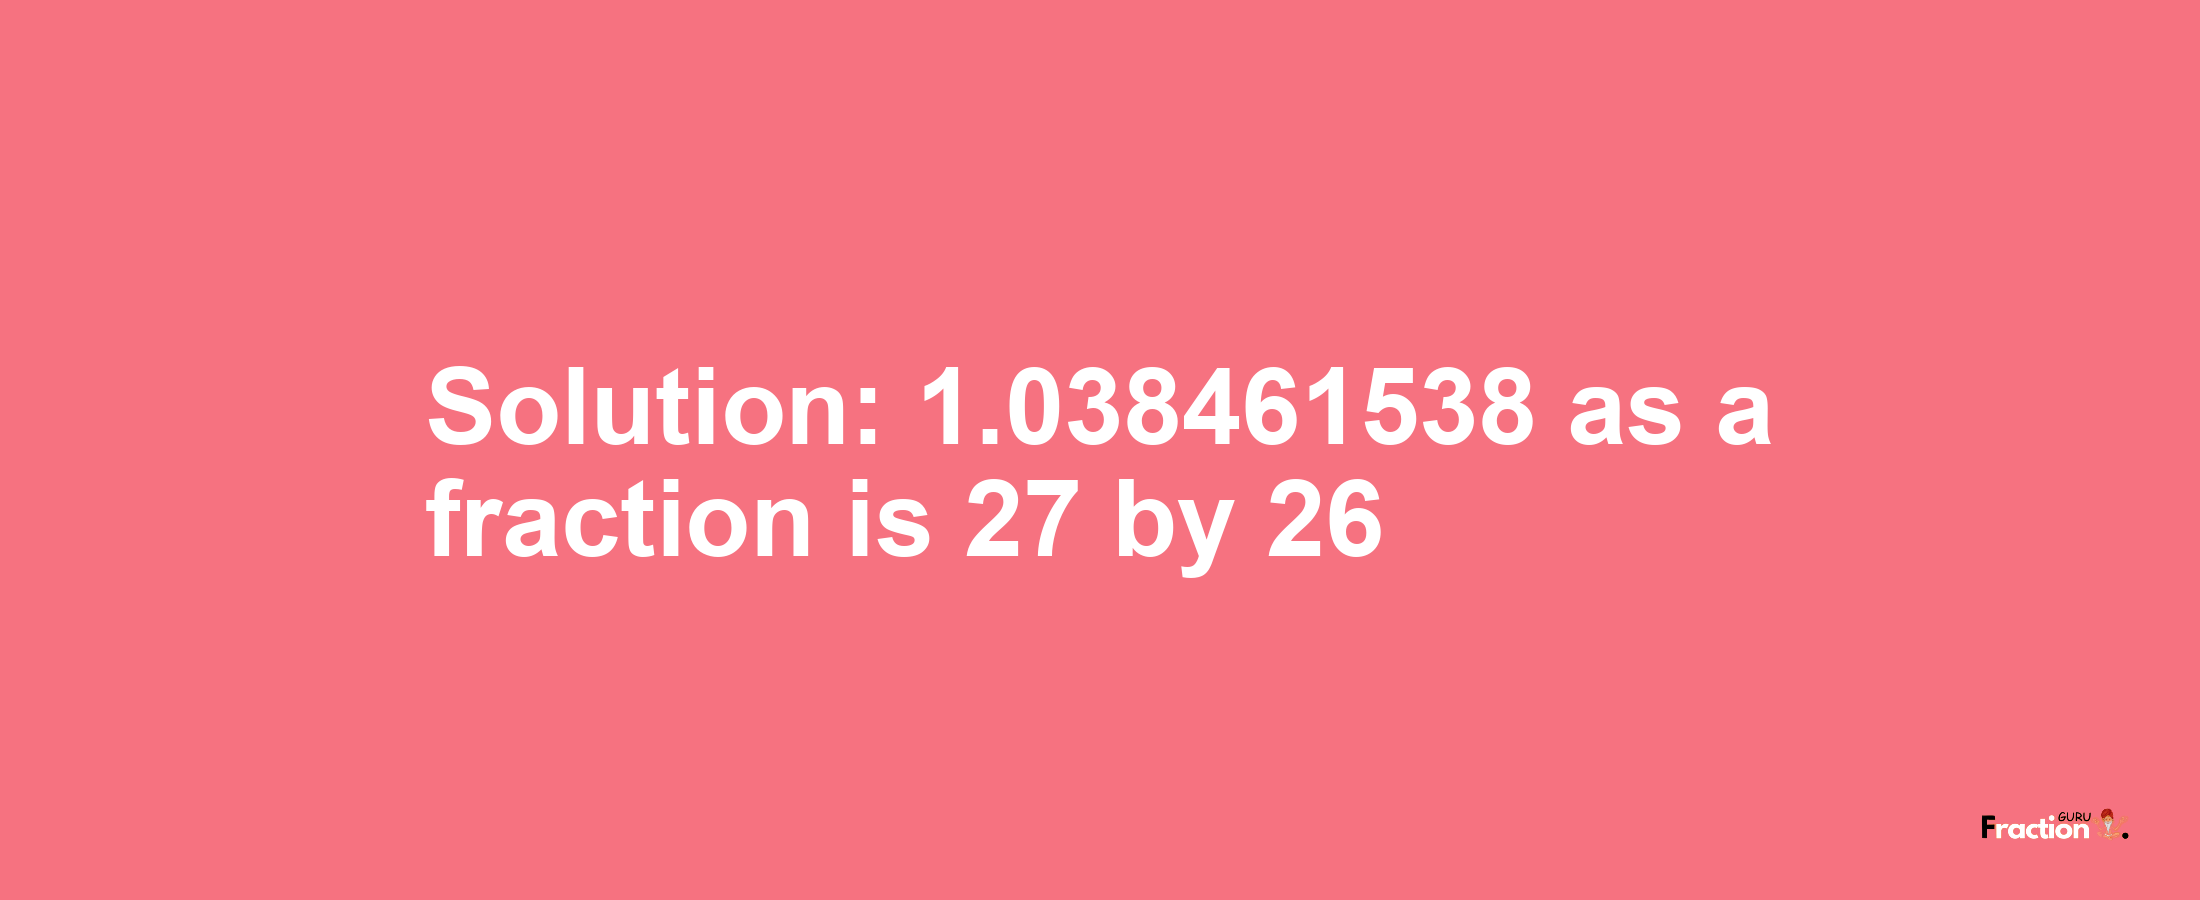 Solution:1.038461538 as a fraction is 27/26